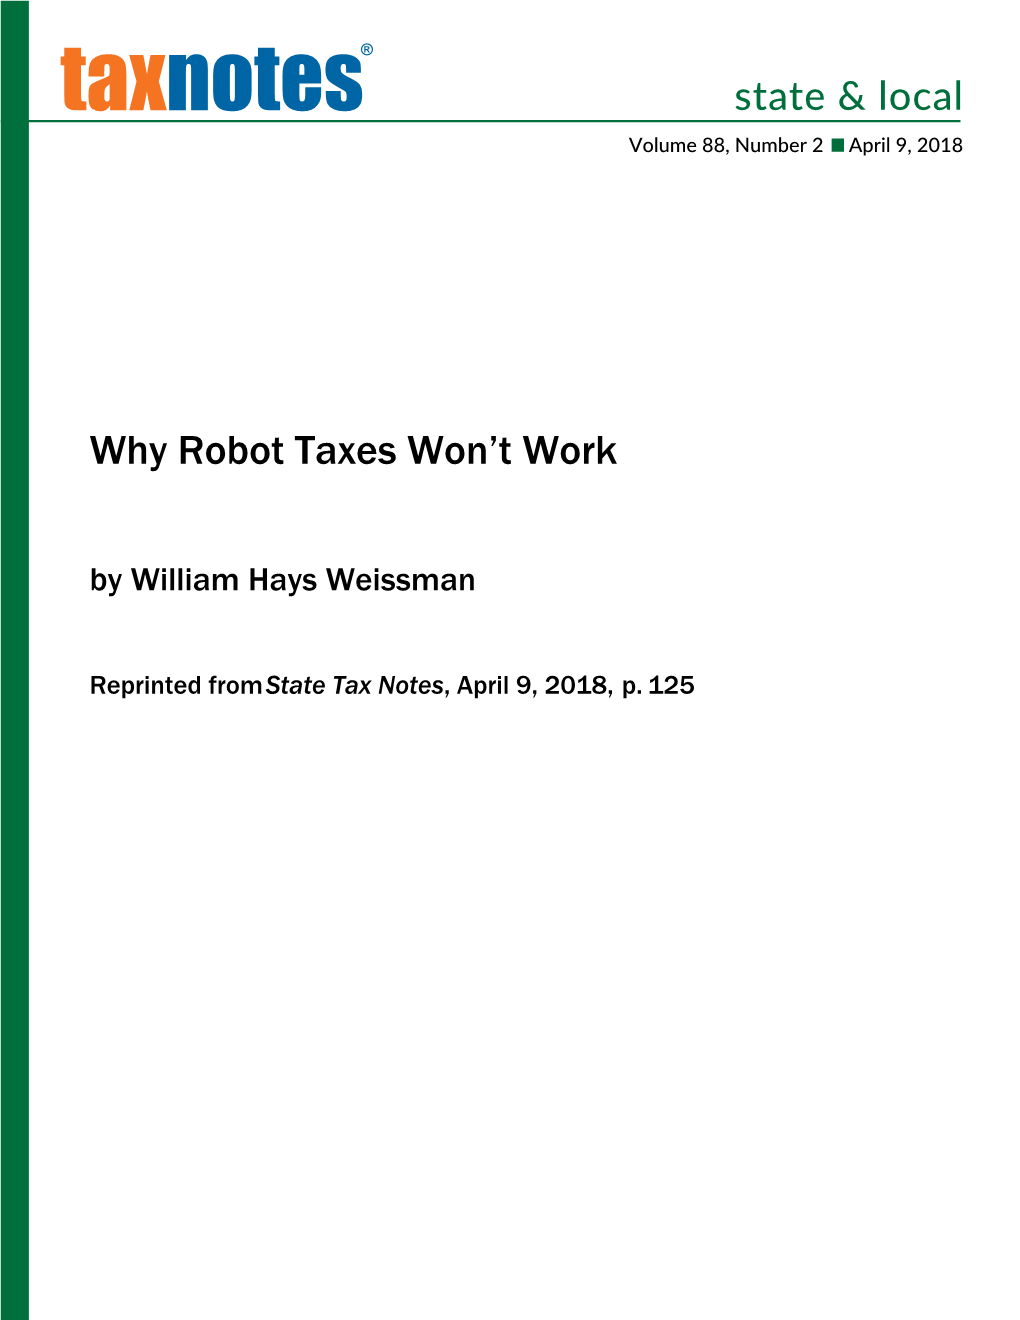 State Tax Notes, April 9, 2018, P